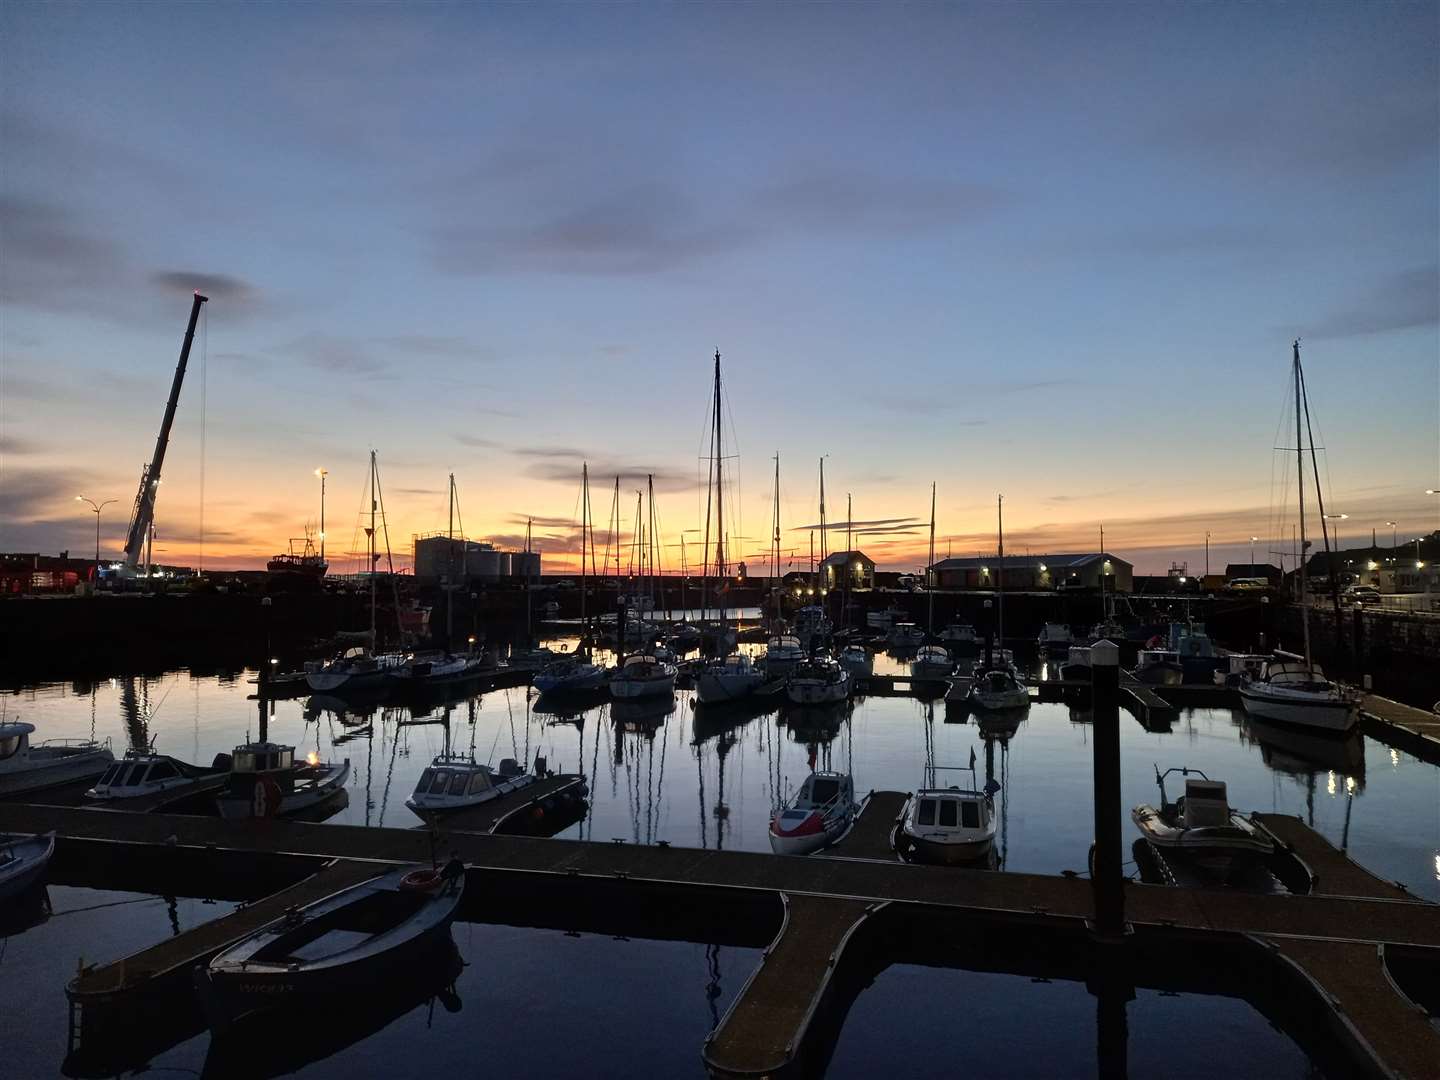 The calm before the storm... Matthew Towe sent this picture of Wick Harbour ahead of Storm Babet.